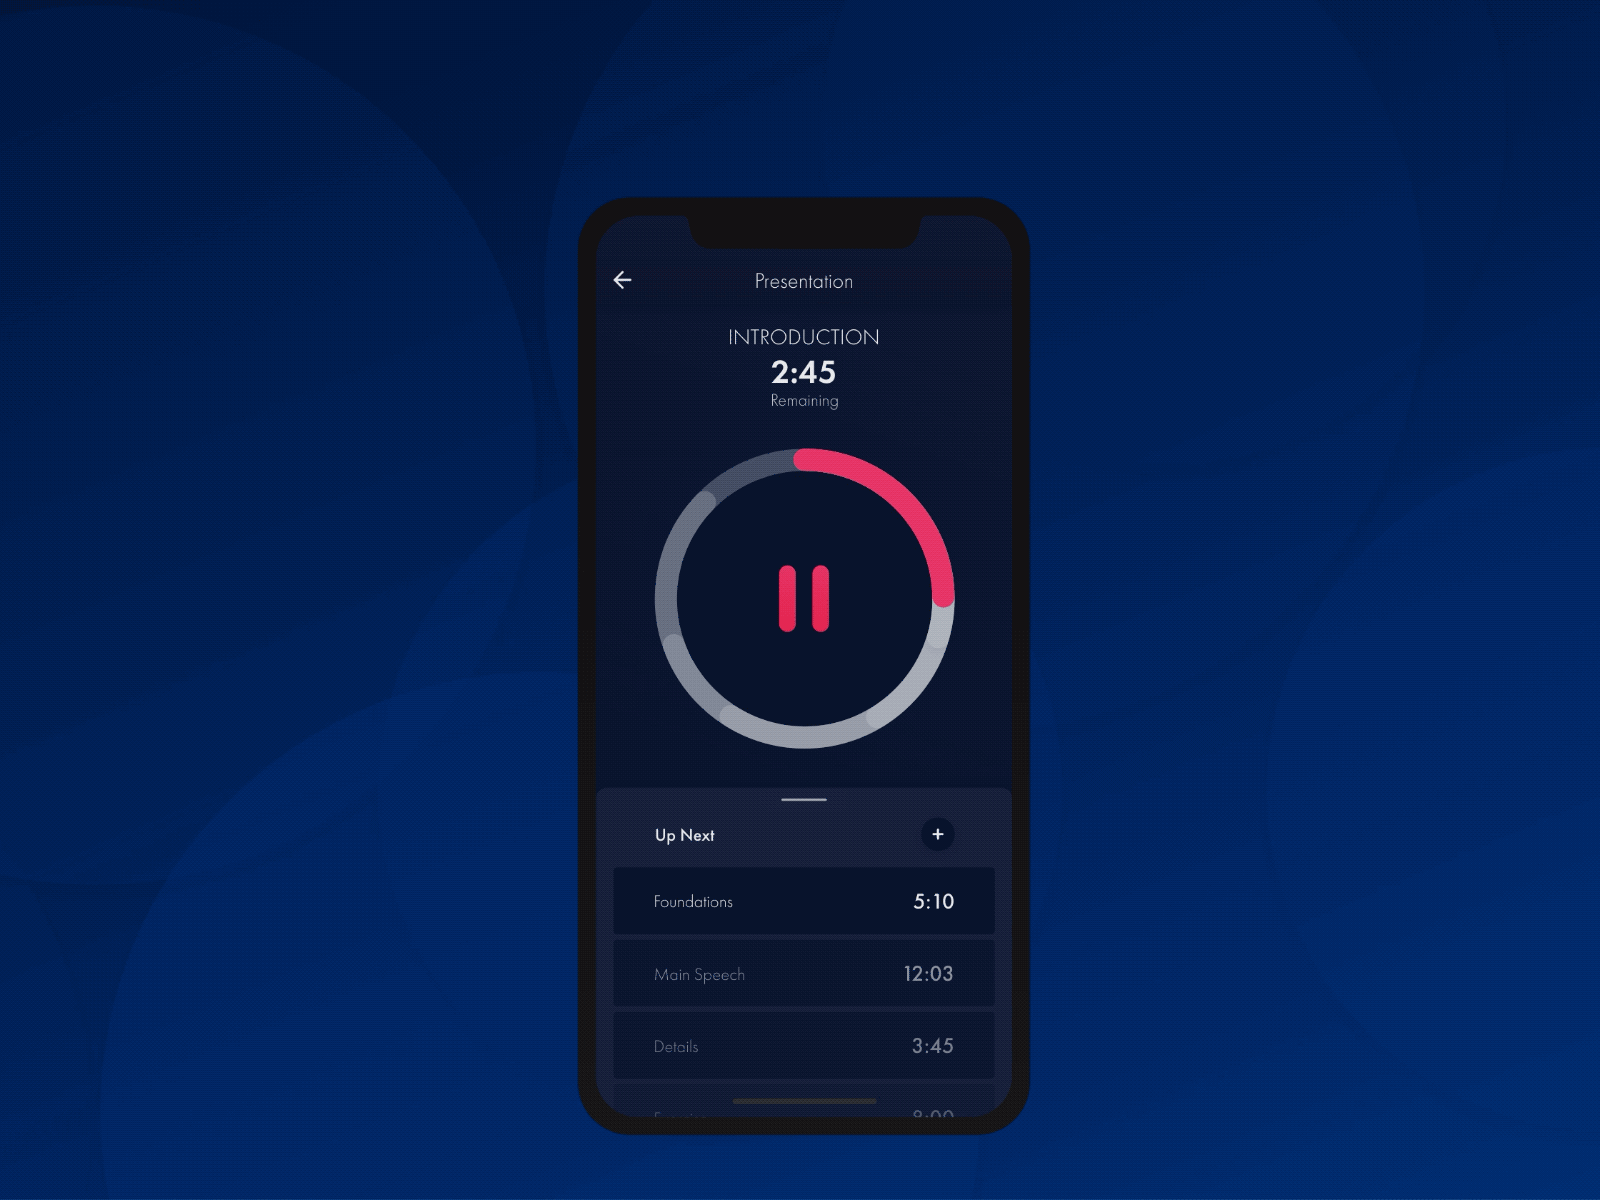 Timer Ui concept - Interactions adobexd animation blue concept dark darkmode experiencedesign interaction microanimation mobile smartphone timer ui user experience user interface ux xd xddailychallenge